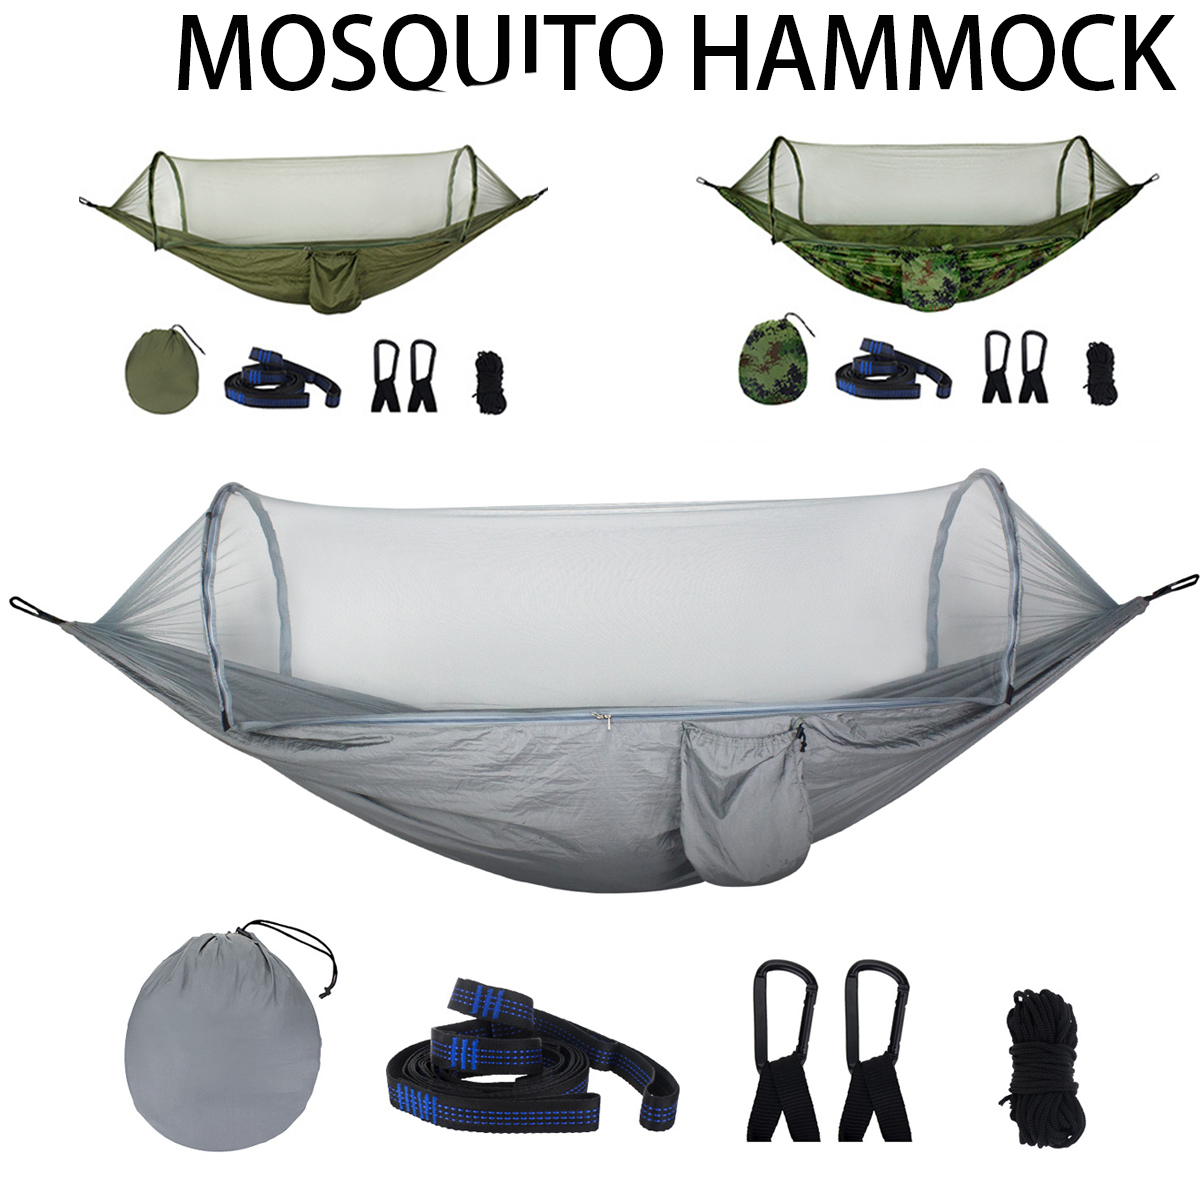 270x140cm-Auto-Quick-Open-Hammock-Outdoor-Camping-Hanging-Swing-Bed-With-Mosquito-Net-Max-Load-250kg-1549846-1